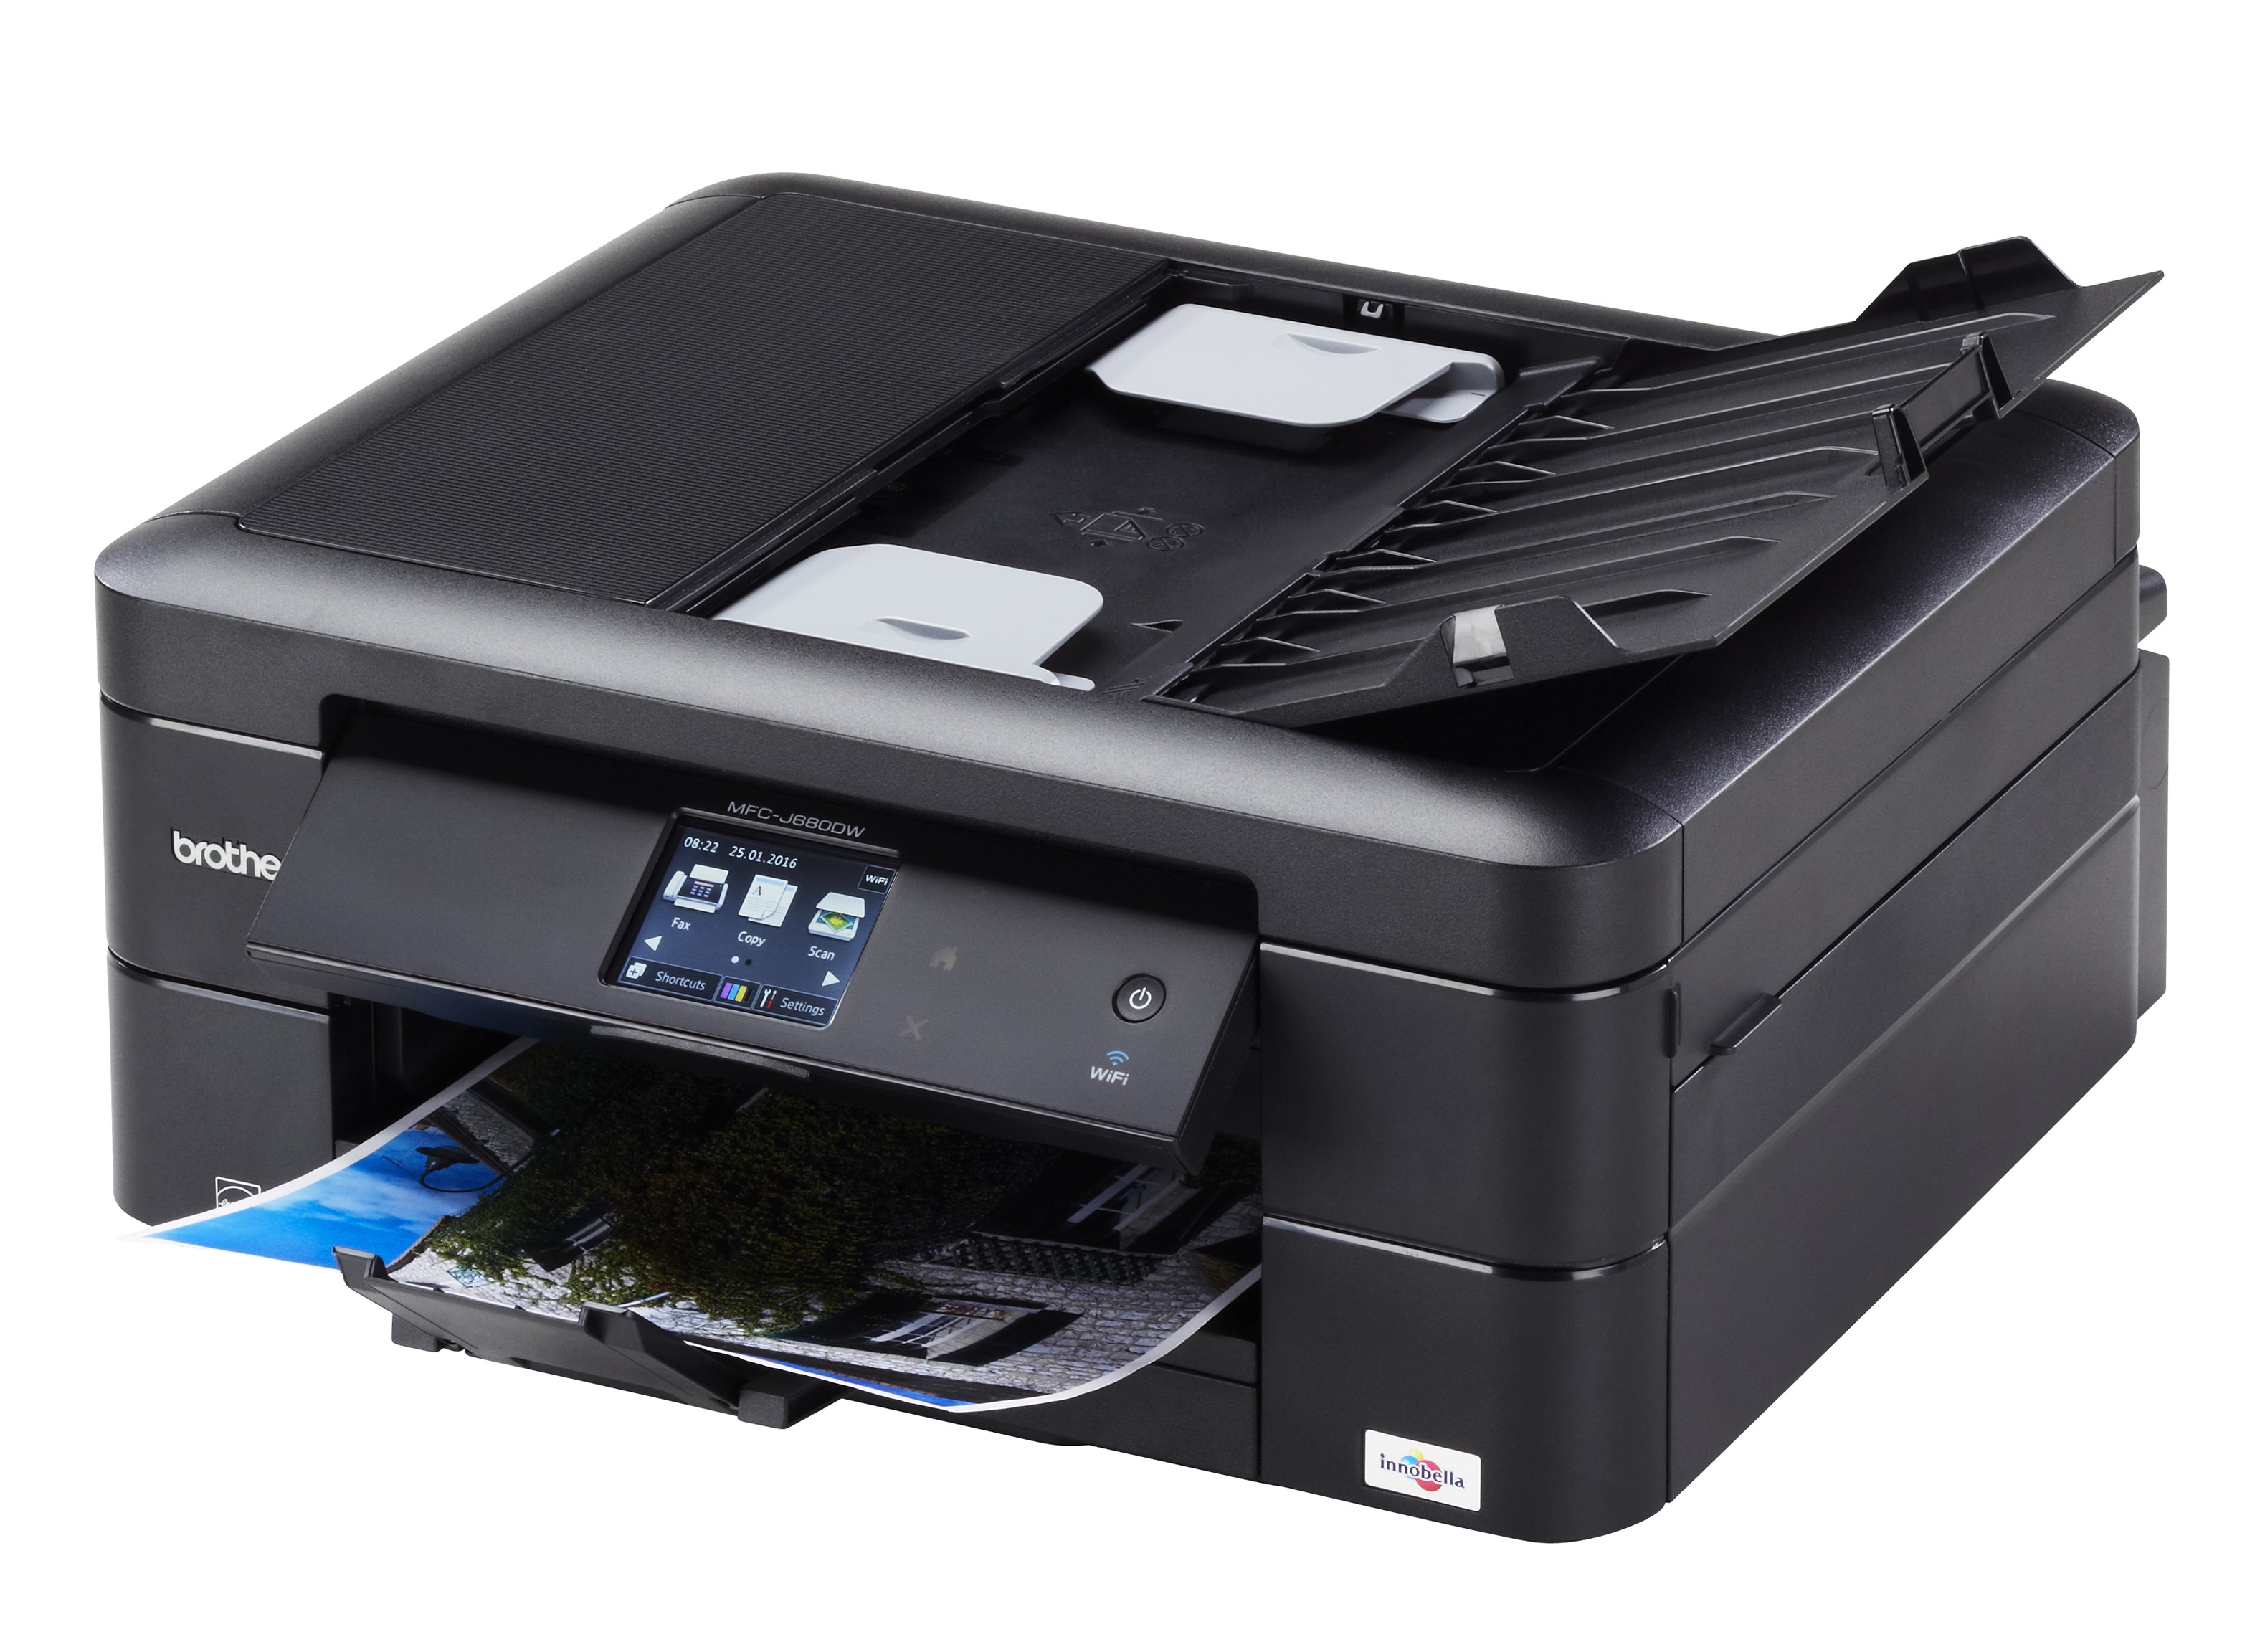 Brother MFC-J985DW Printer Review: Low-Maintenance